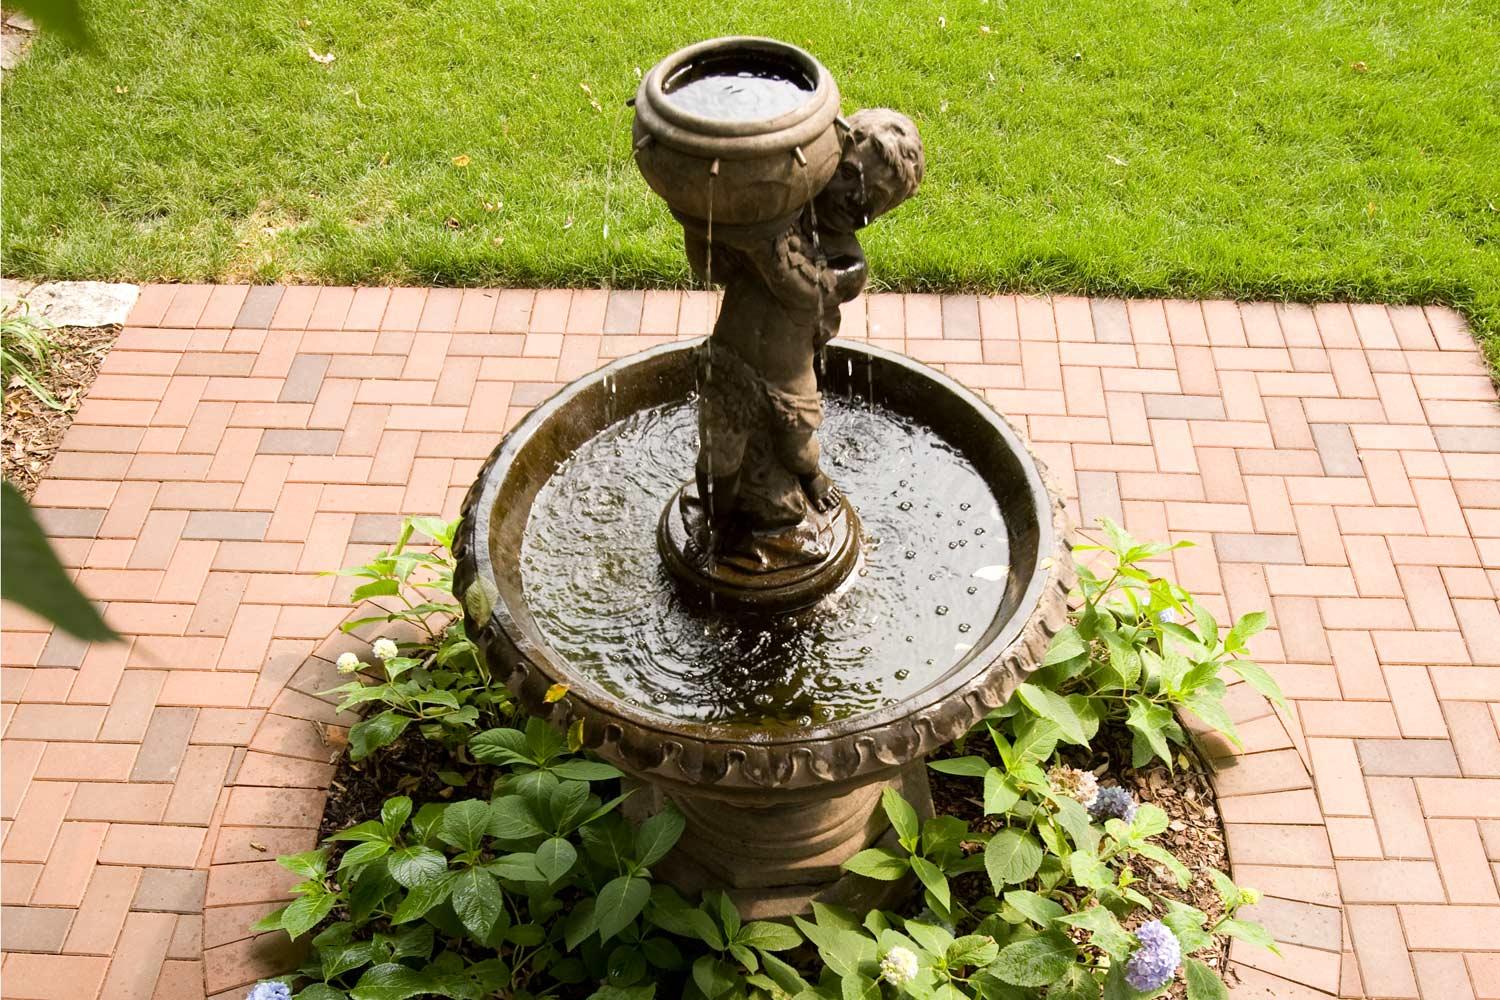 Sculptural water fountain feature and brick patio.